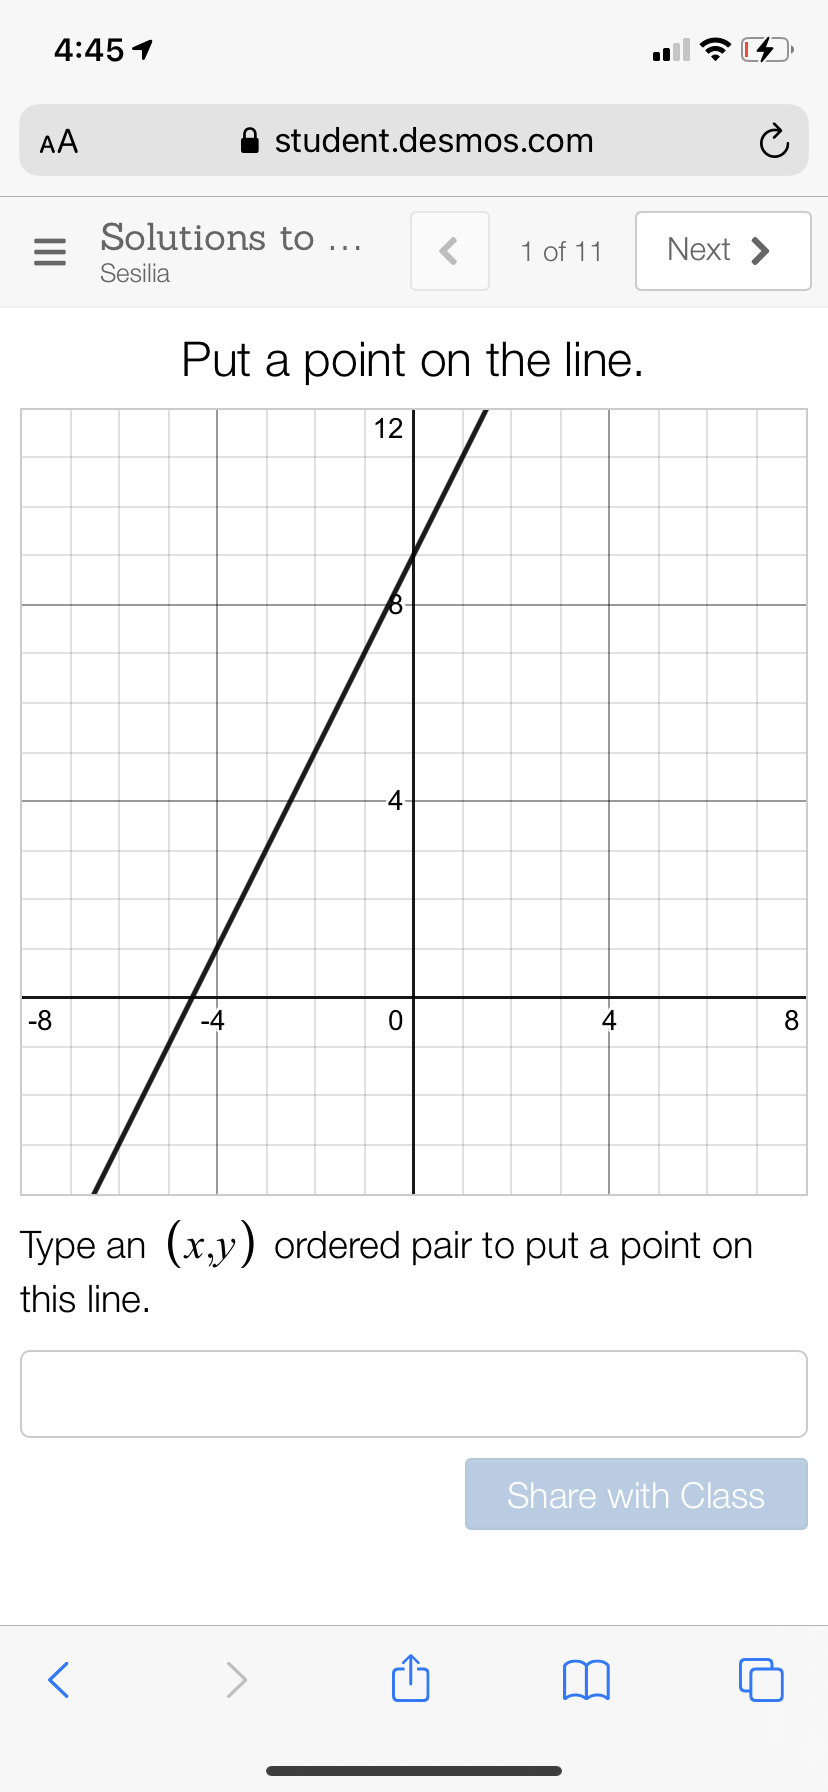 4:45 1
AA
student.desmos.com
Solutions to ...
1 of 11
Next >
Sesilia
Put a point on the line.
12
-4
-8
-4
4
8
Type an (x,y) ordered pair to put a point on
this line.
Share with Class
II
